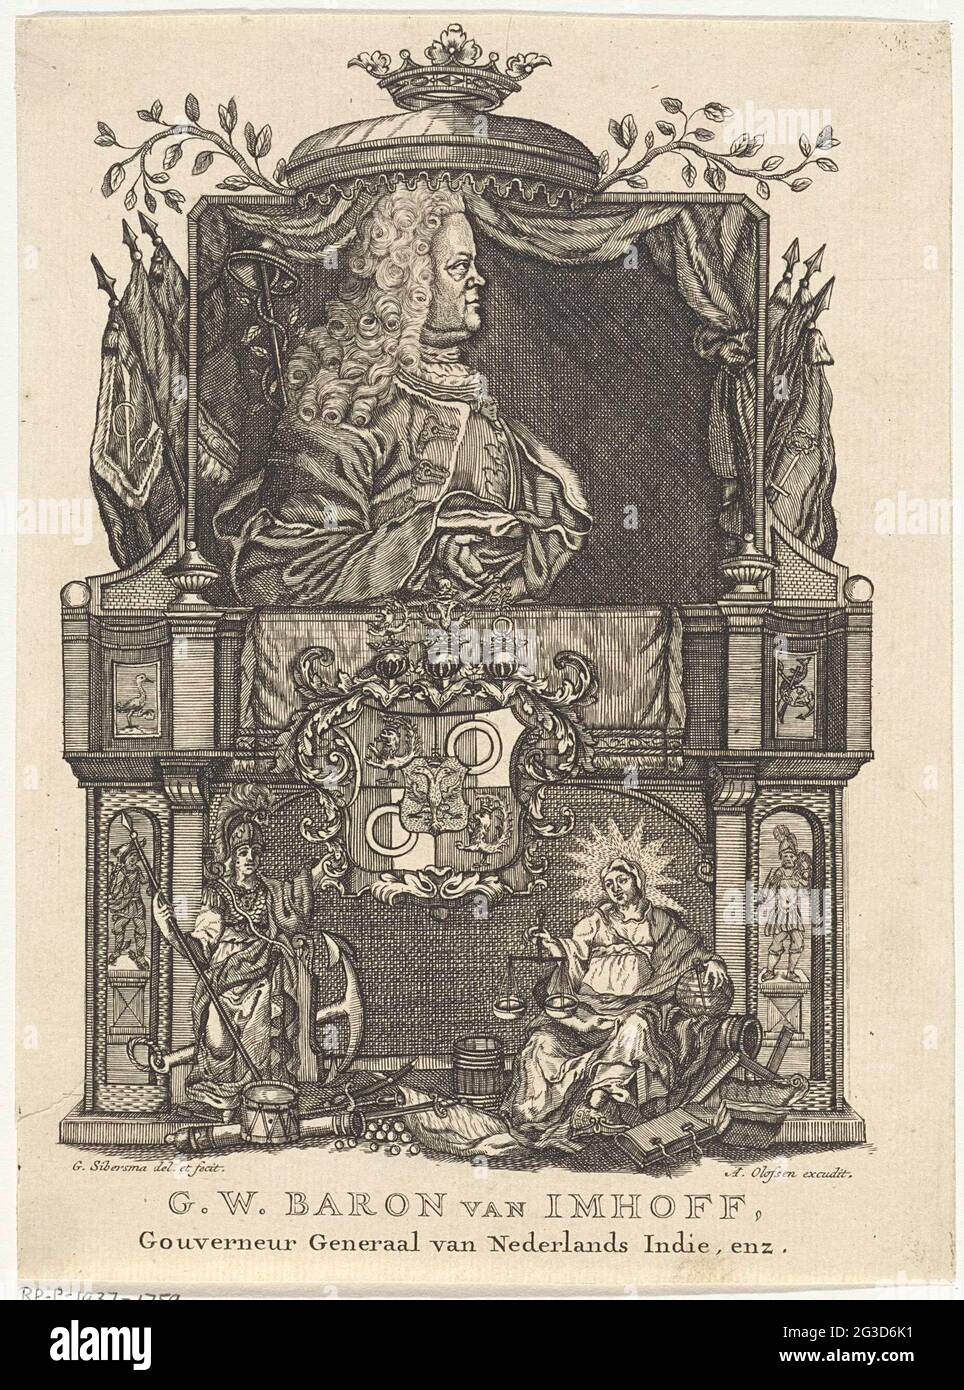 Portrait of gustaaf Willem (i) Baron van Imhoff. Portrait of Gustaaf Willem  (i) Baron van Imhoff, Governor General of Dutch Indie. He is sitting on a  balcony under a crowned canopy. There